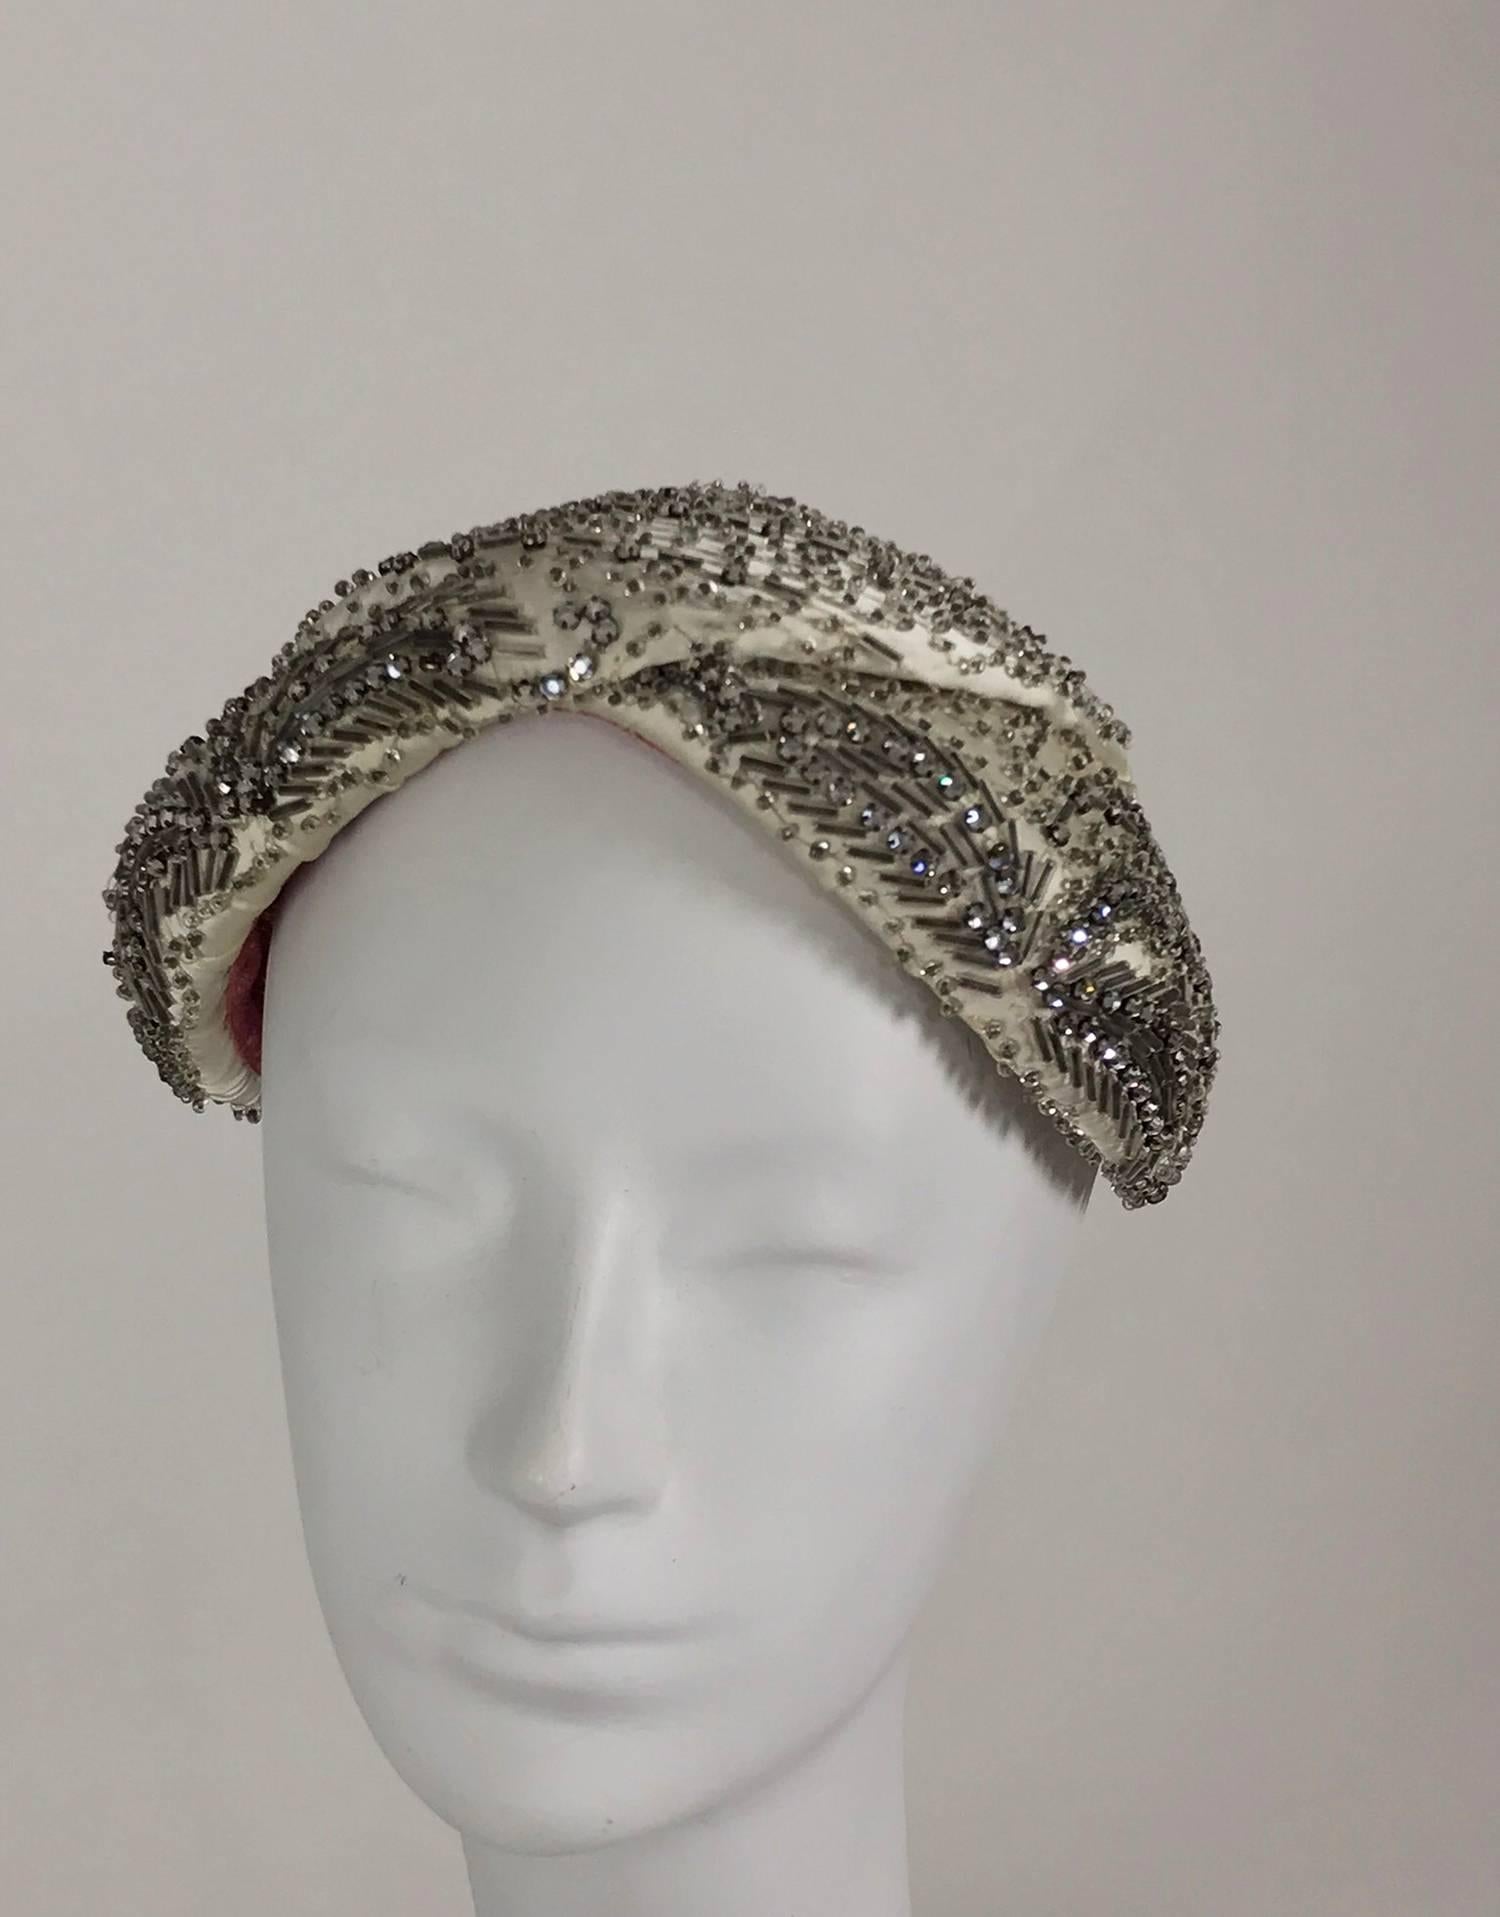 Designed by Lora rhinestone and beaded cocktail hat from the 1950s. Classic 50s band style hat of off white, with a touch of silver, silk heavily beaded in crystal and silver and set with rhinestones. The front of the hat has foliate sprays of